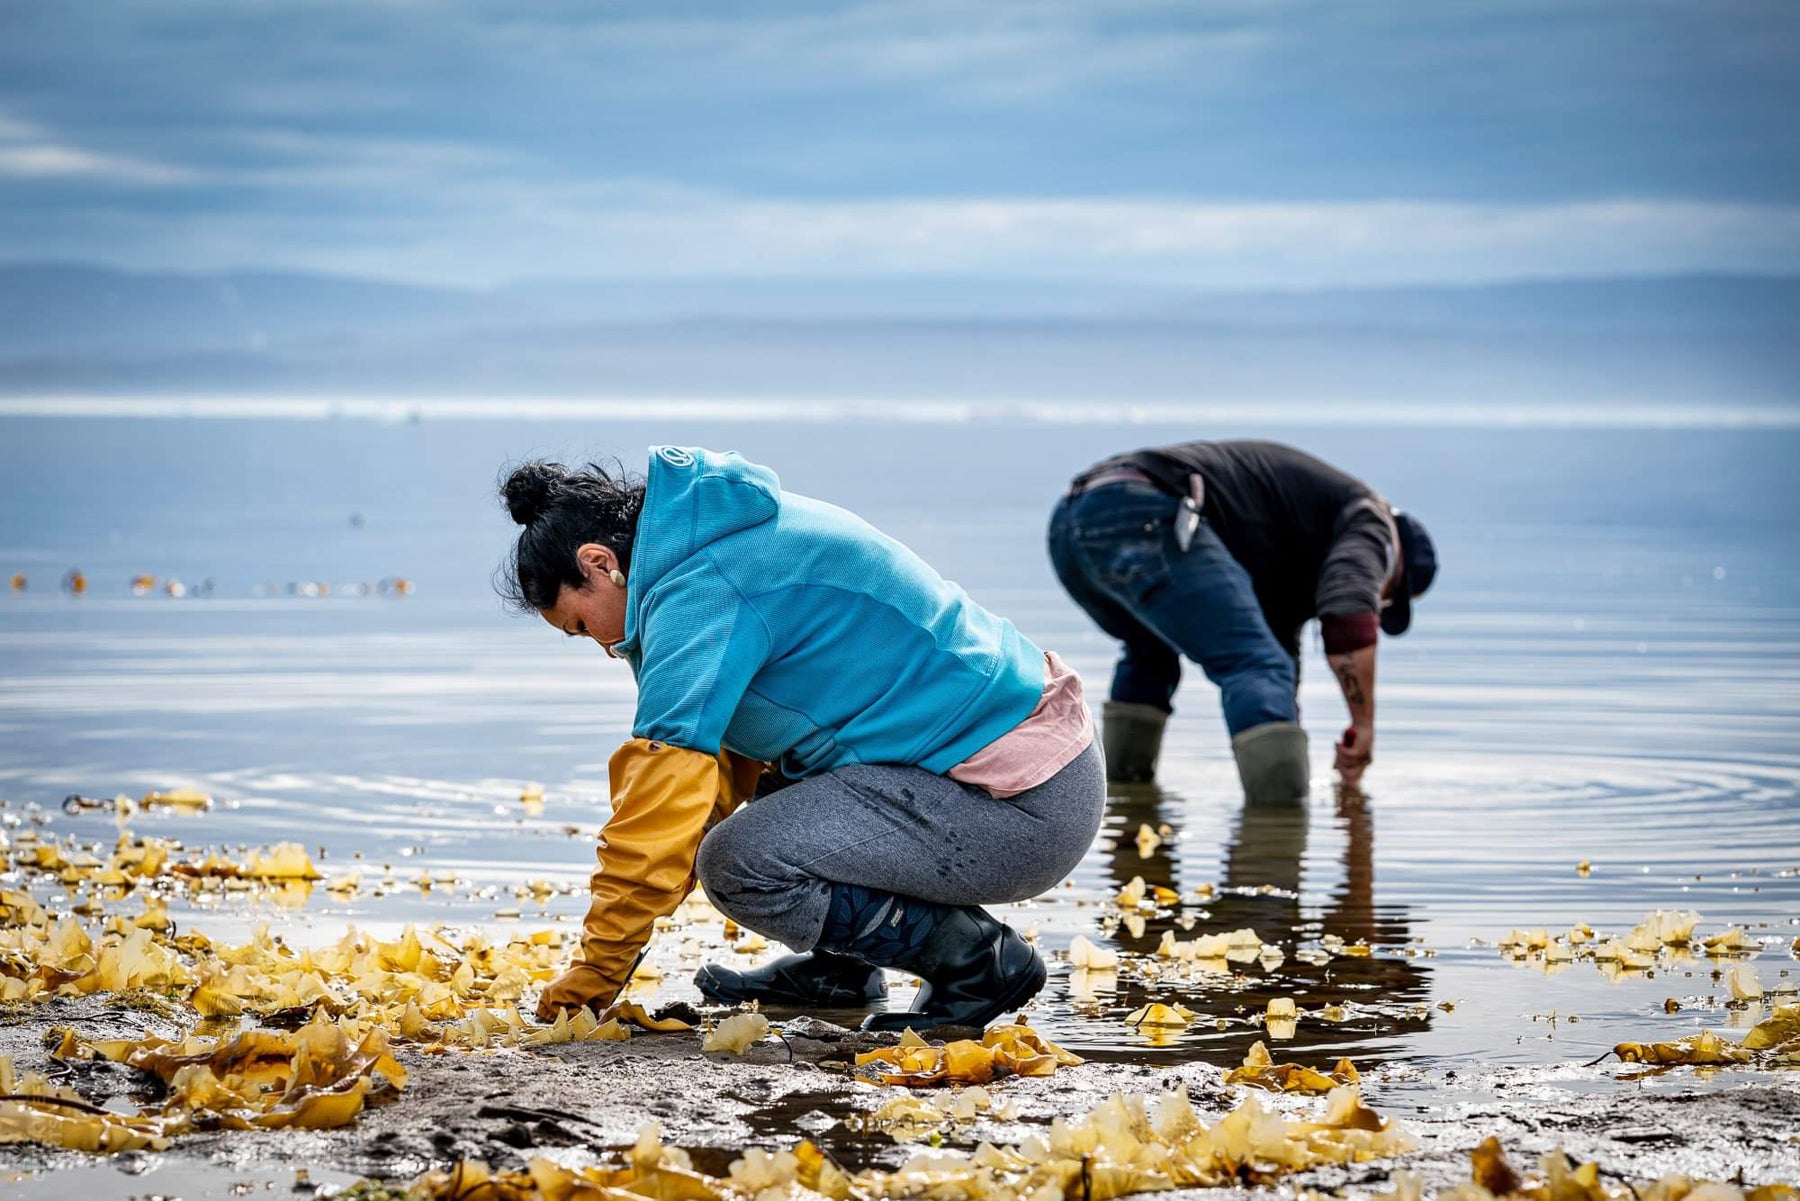 Photograph of Bernice and Justin Clarke, founders of UasaU soap, bent over, side by side foraging for seaweed in Nunavut.